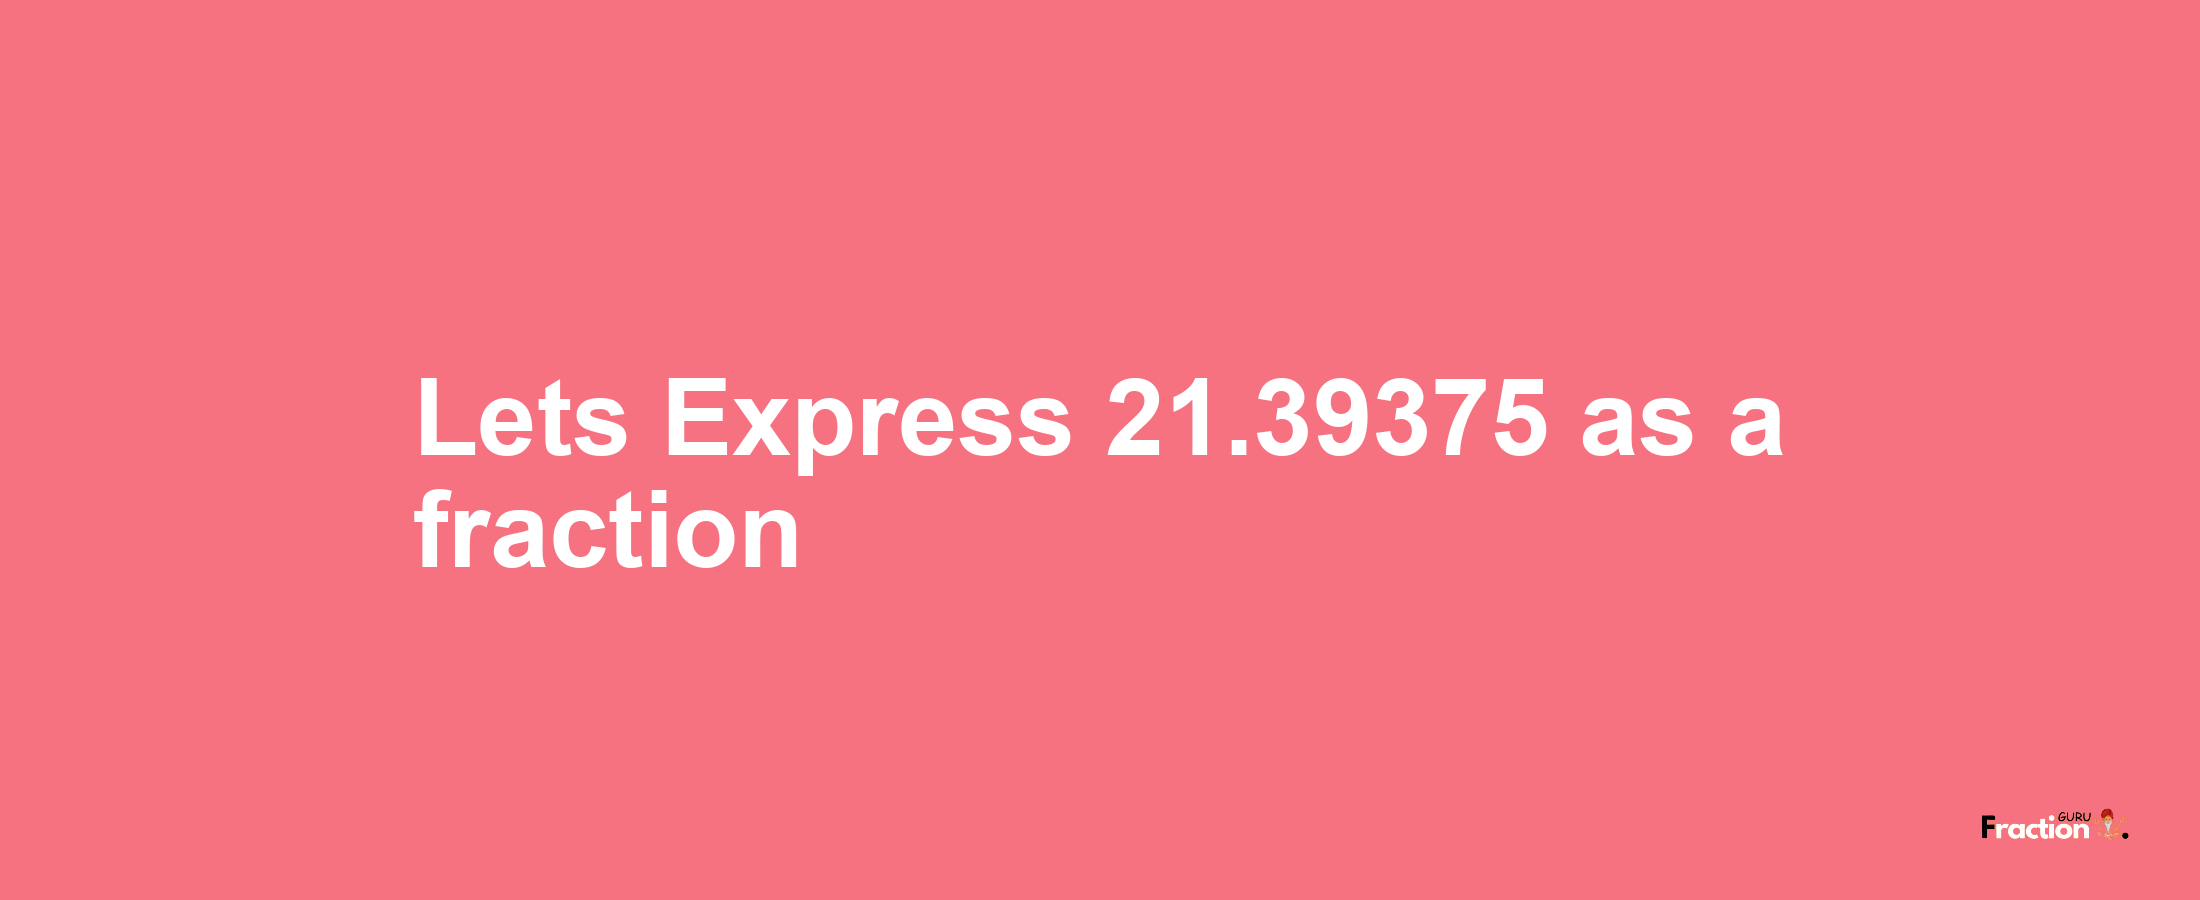 Lets Express 21.39375 as afraction